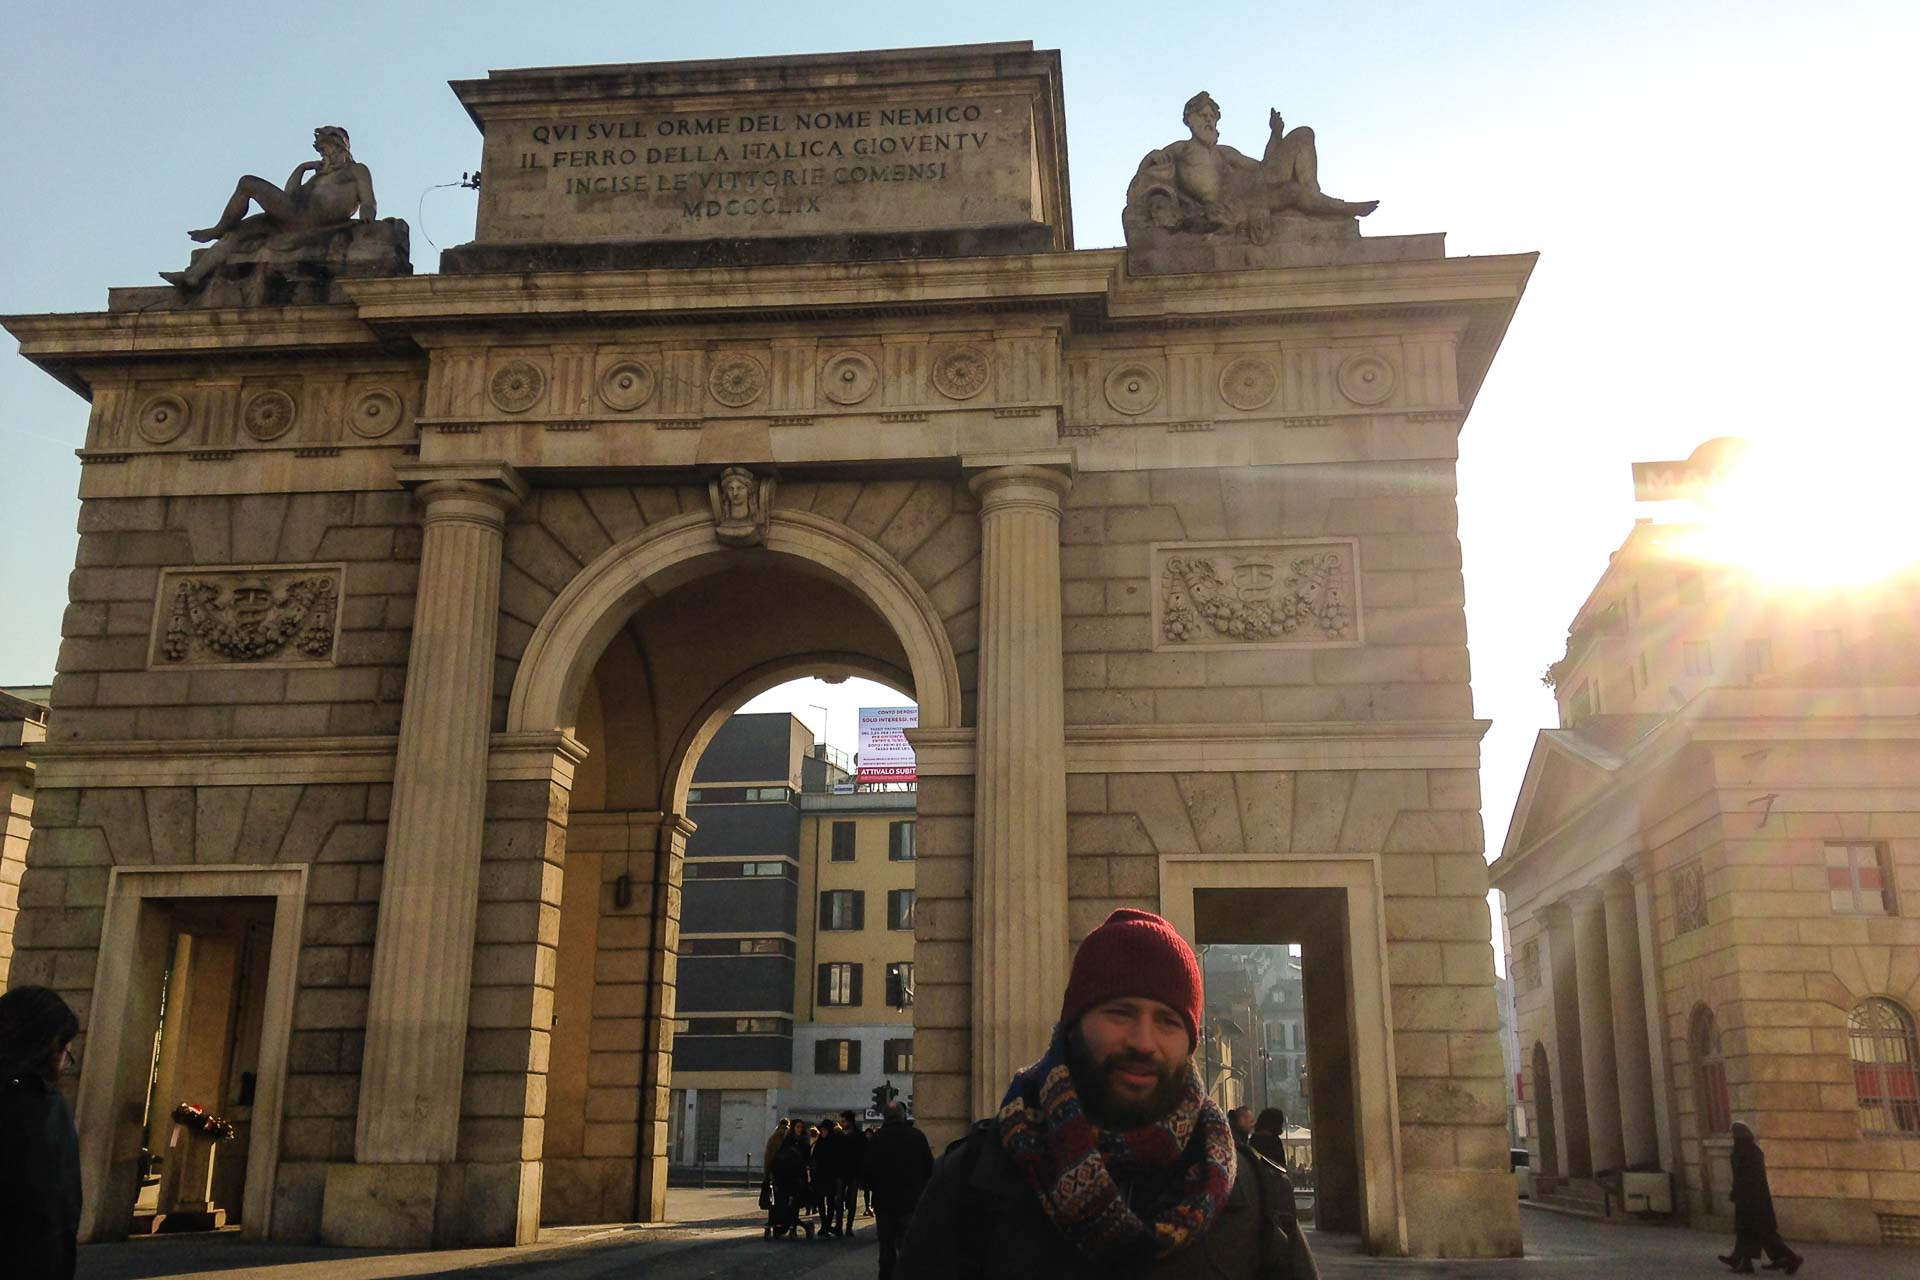 Tiago in front of an arch in Milan with the sun on the corner